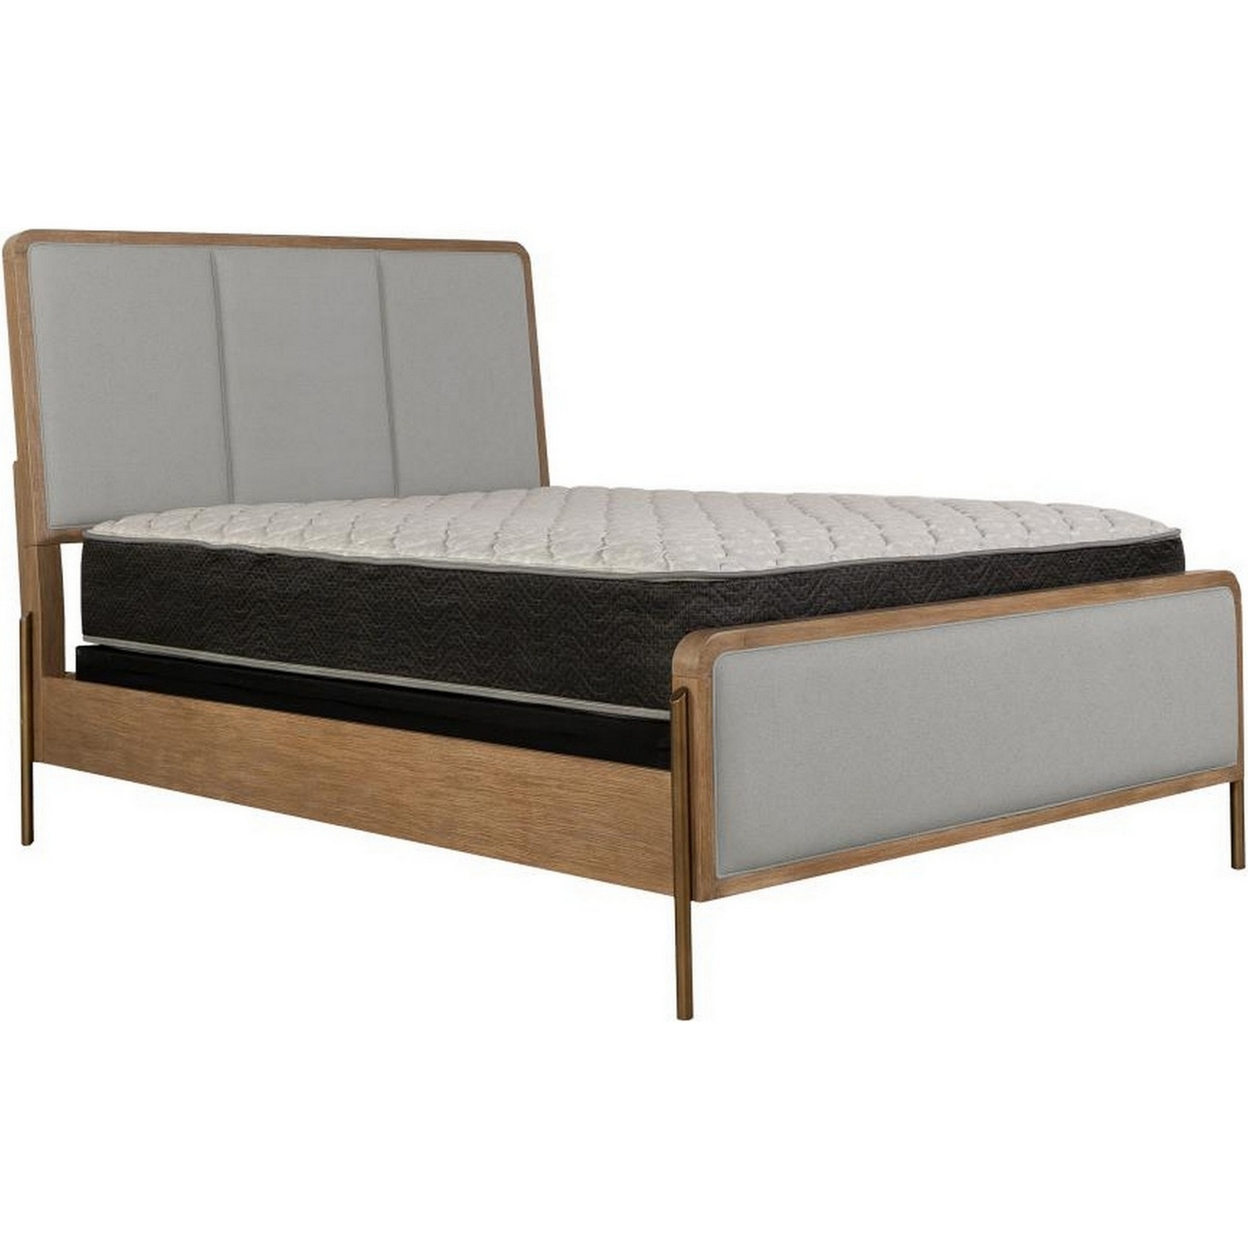 Niko Wood Queen Size Bed With Padded Upholstery, 4 Slats, Wirebrushed Gray- Saltoro Sherpi